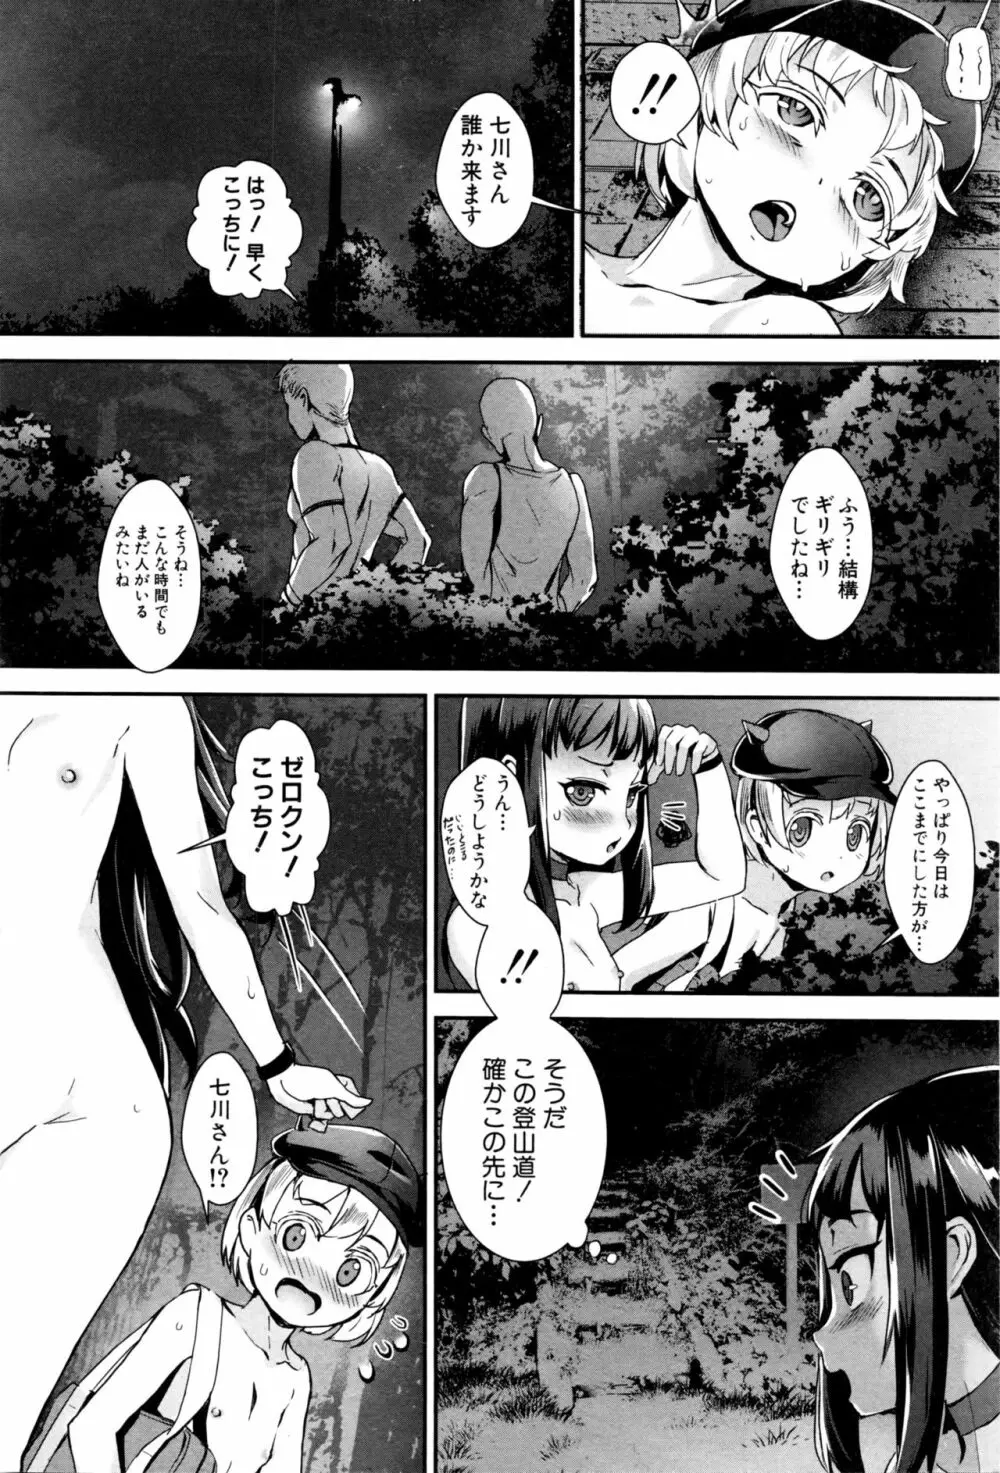 T.F.S 第1-4話 + 御負け PV Page.64